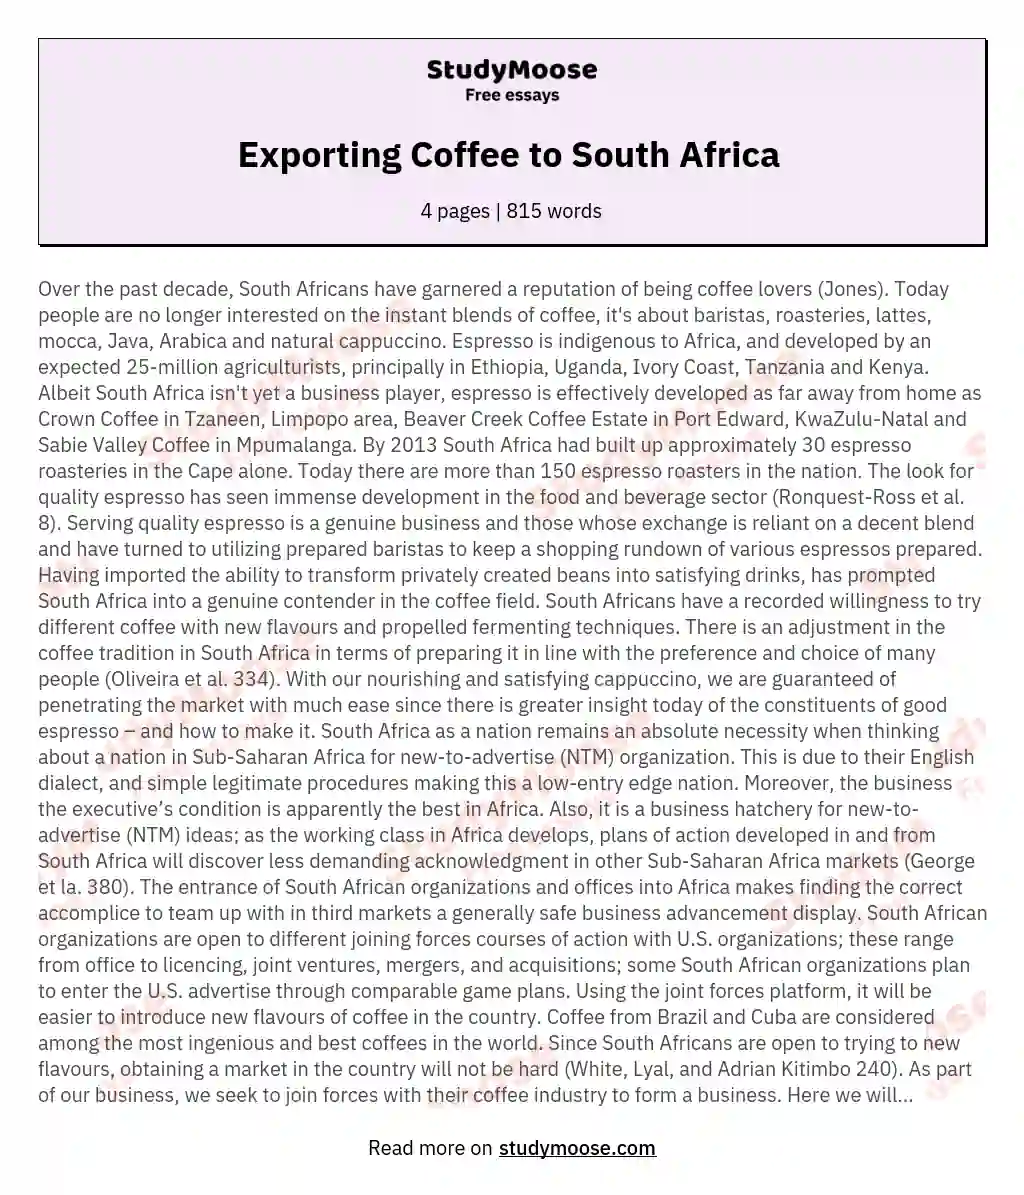 Exporting Coffee to South Africa  essay